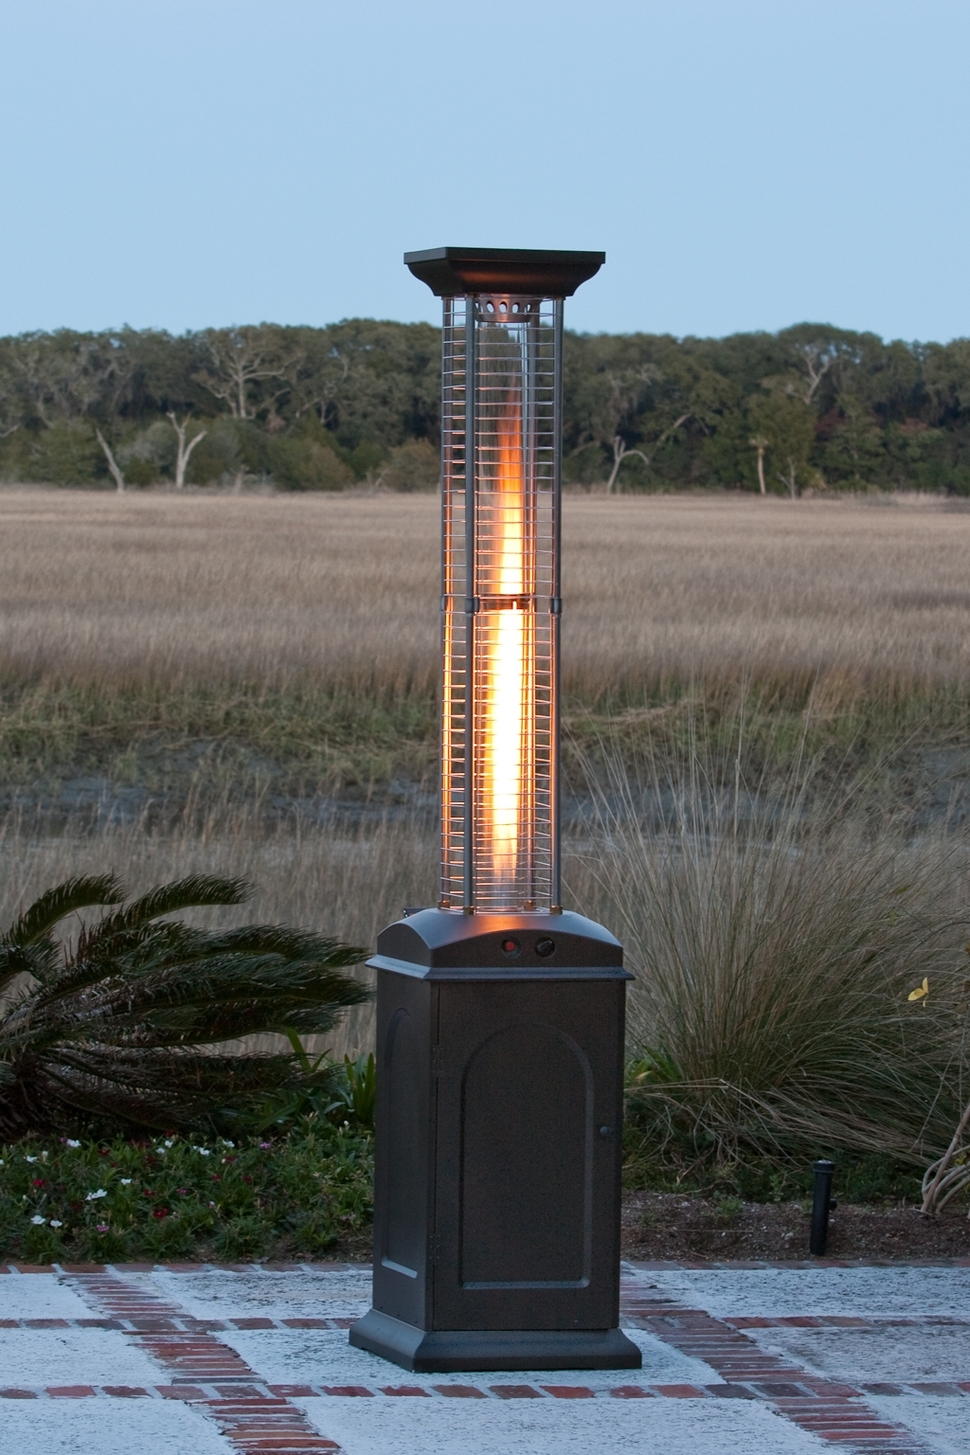 outdoor-gas-heaters-heat-up-your-patio-appeal-firesense-square-mocha.jpg